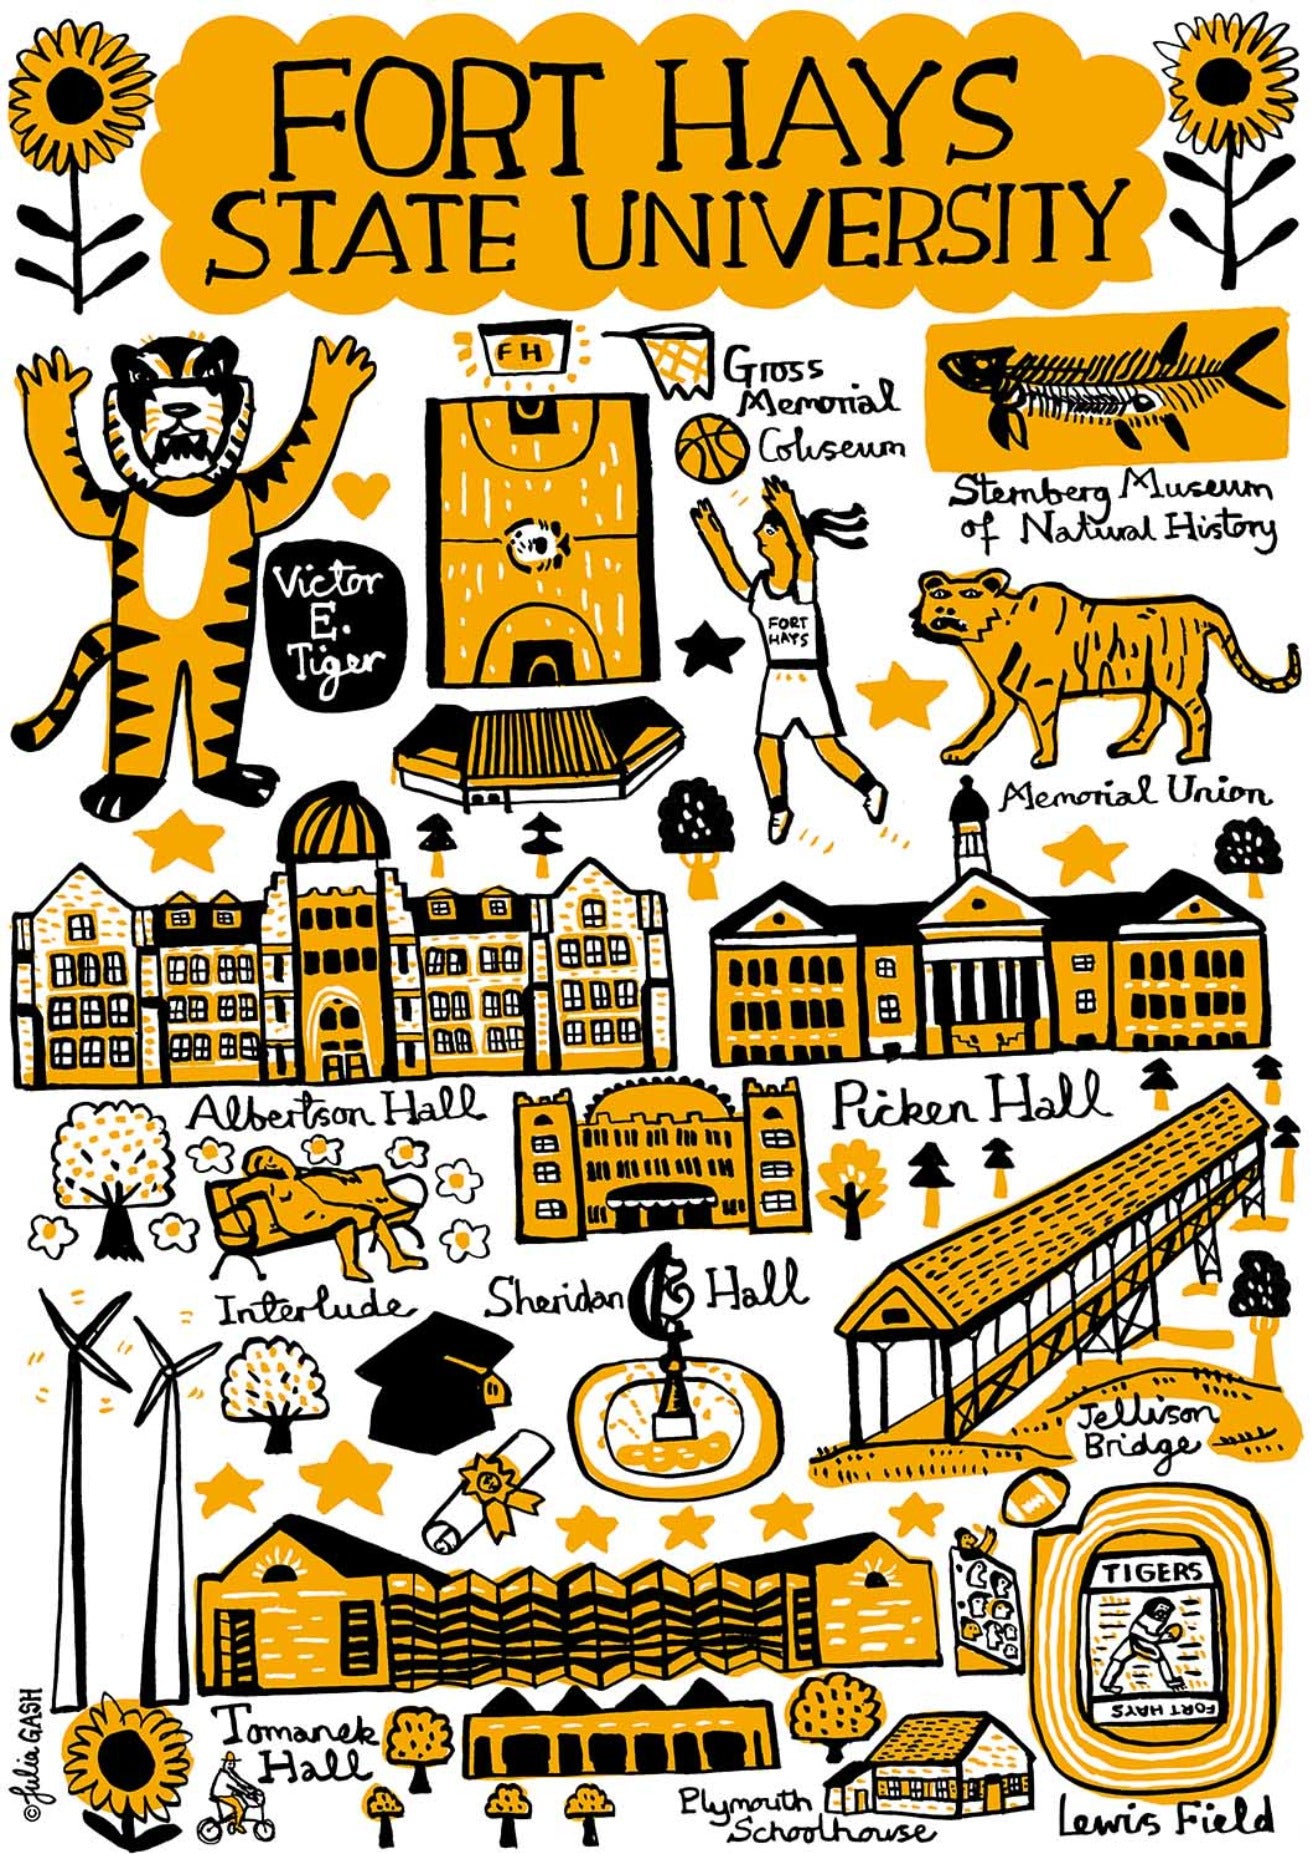 Fort Hays State University by Julia Gash